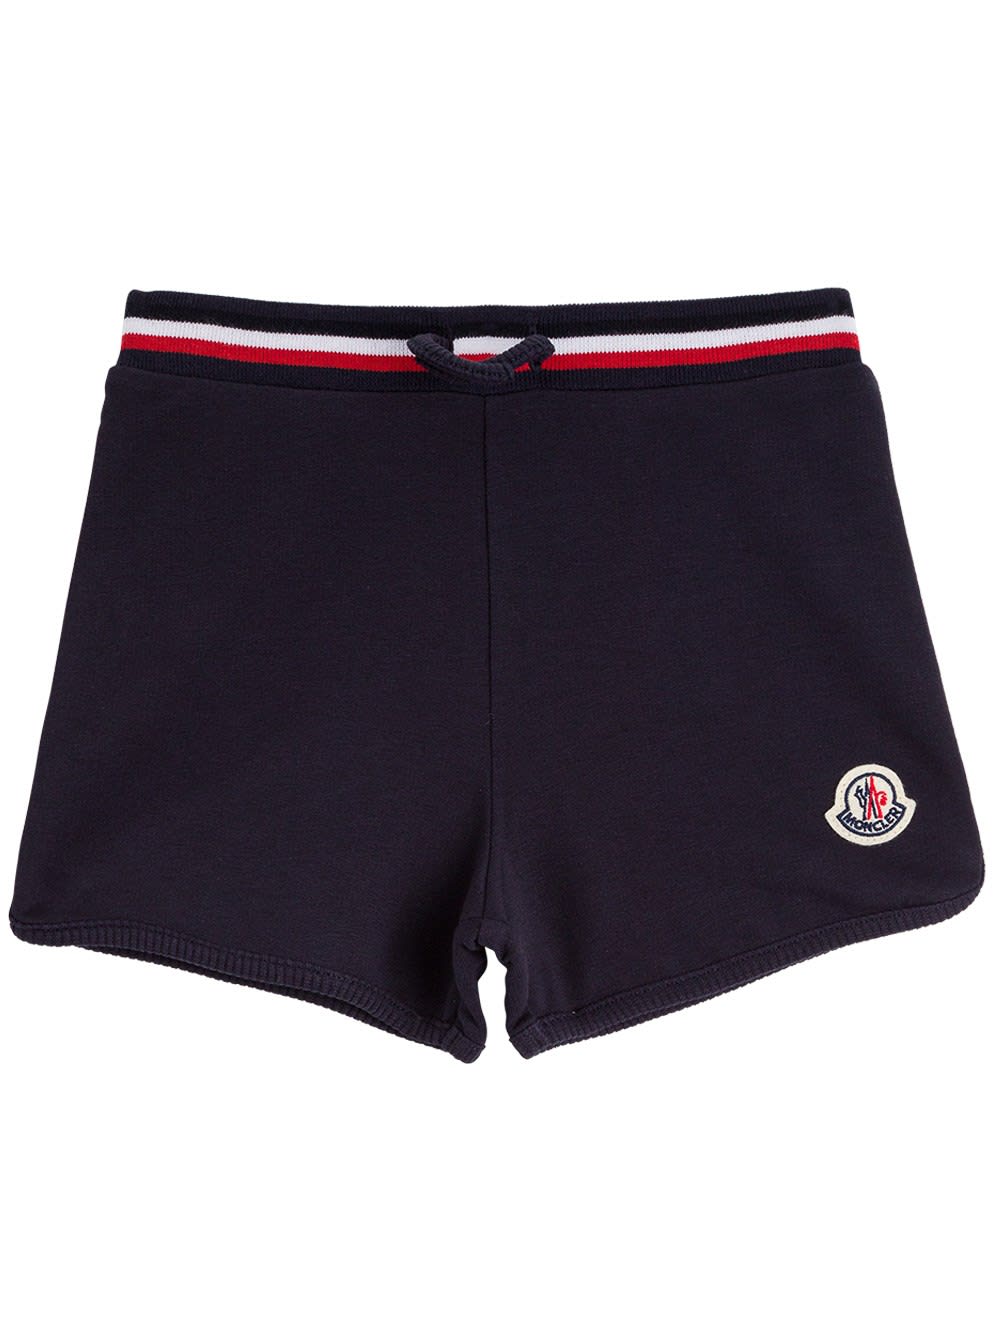 MONCLER JERSEY SHORTS WITH LOGO PATCH,8H71000 899AR742